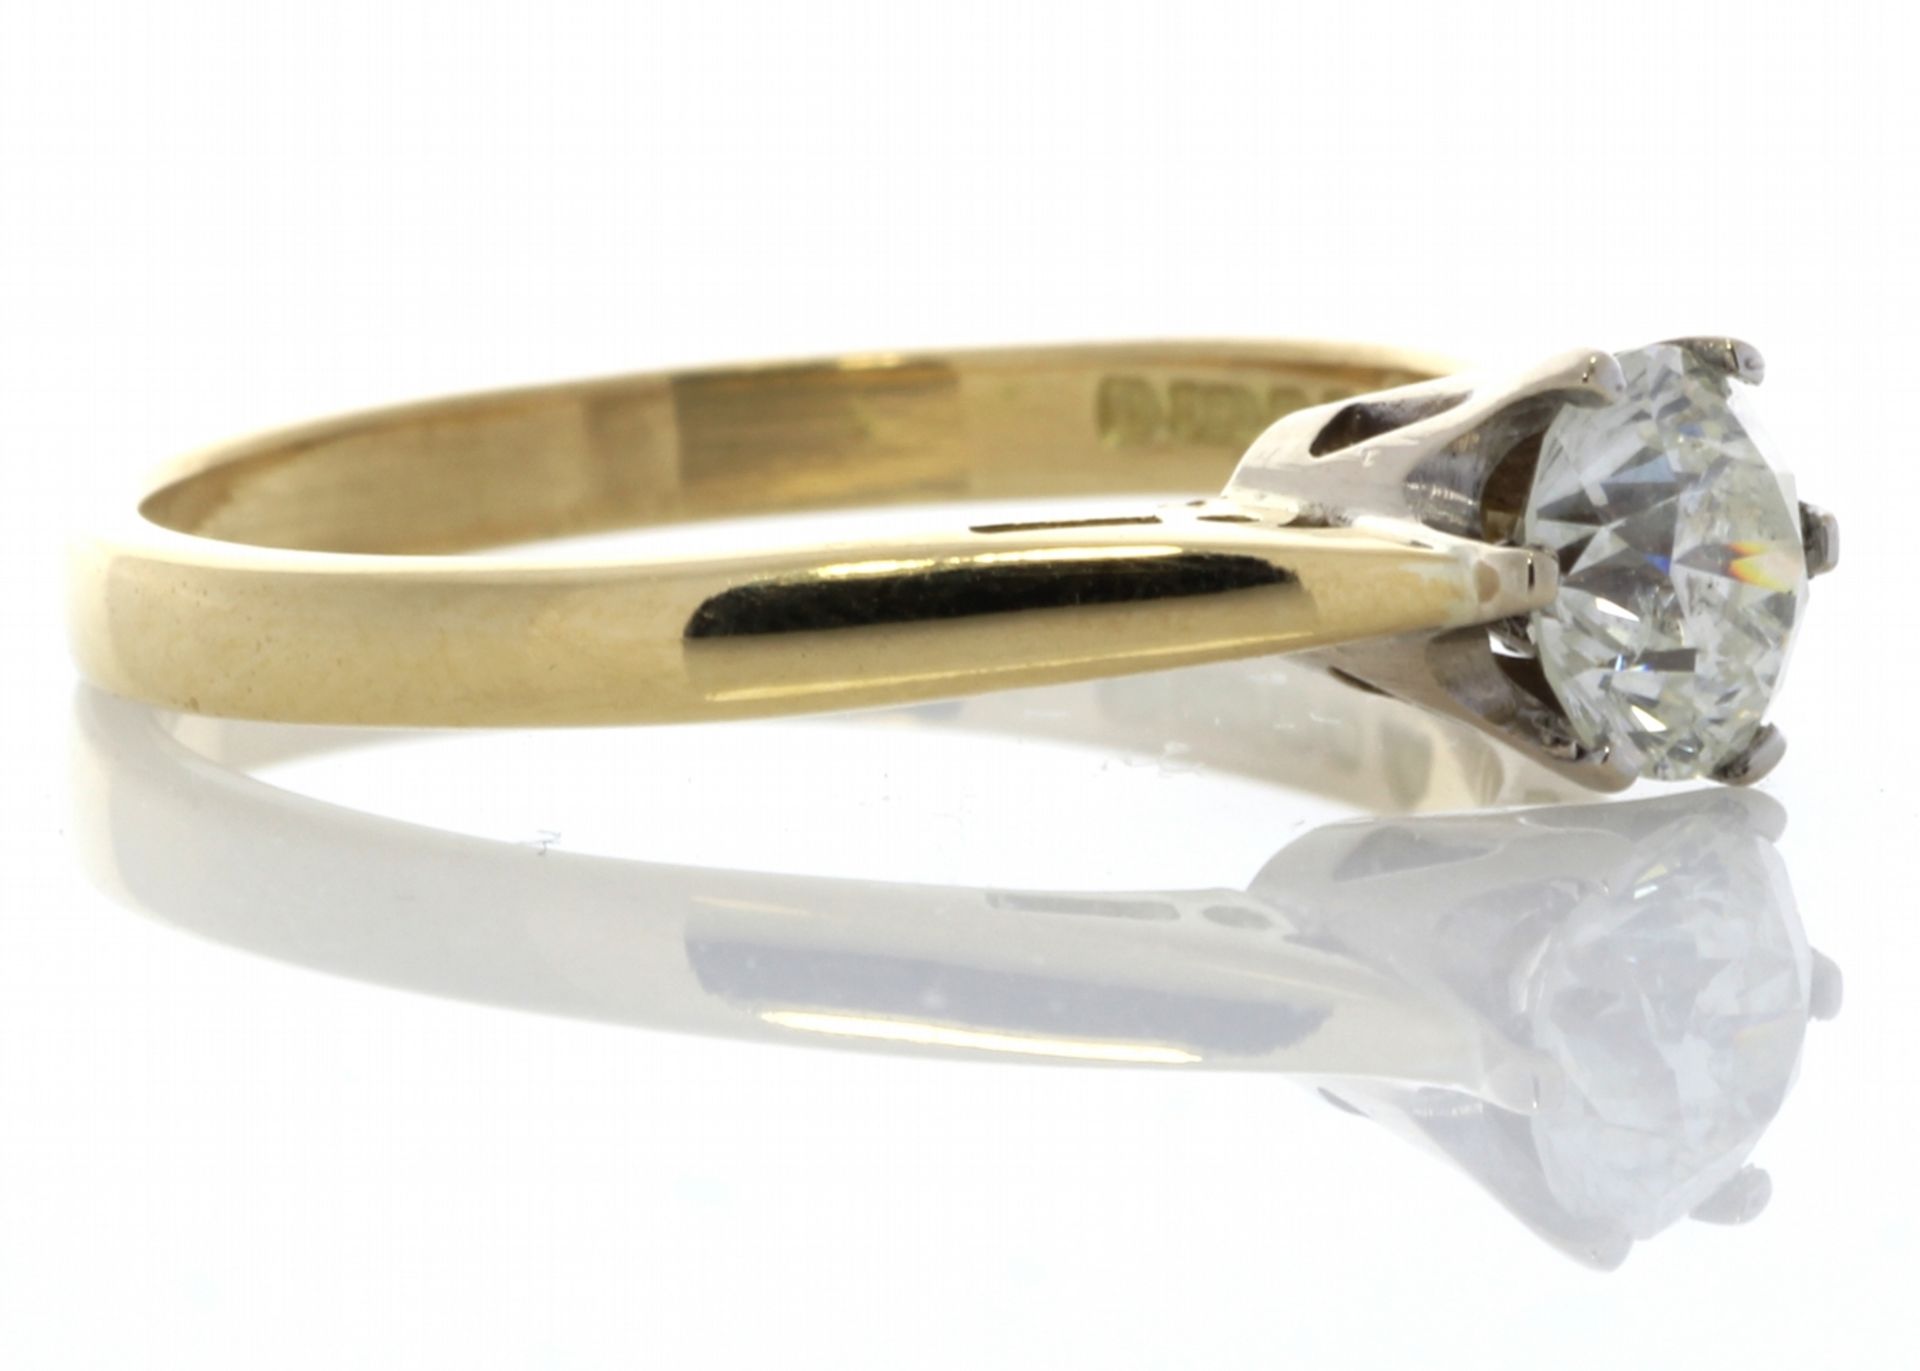 18ct Yellow Gold Diamond Engagement Ring 0.61 Carats - Image 4 of 6